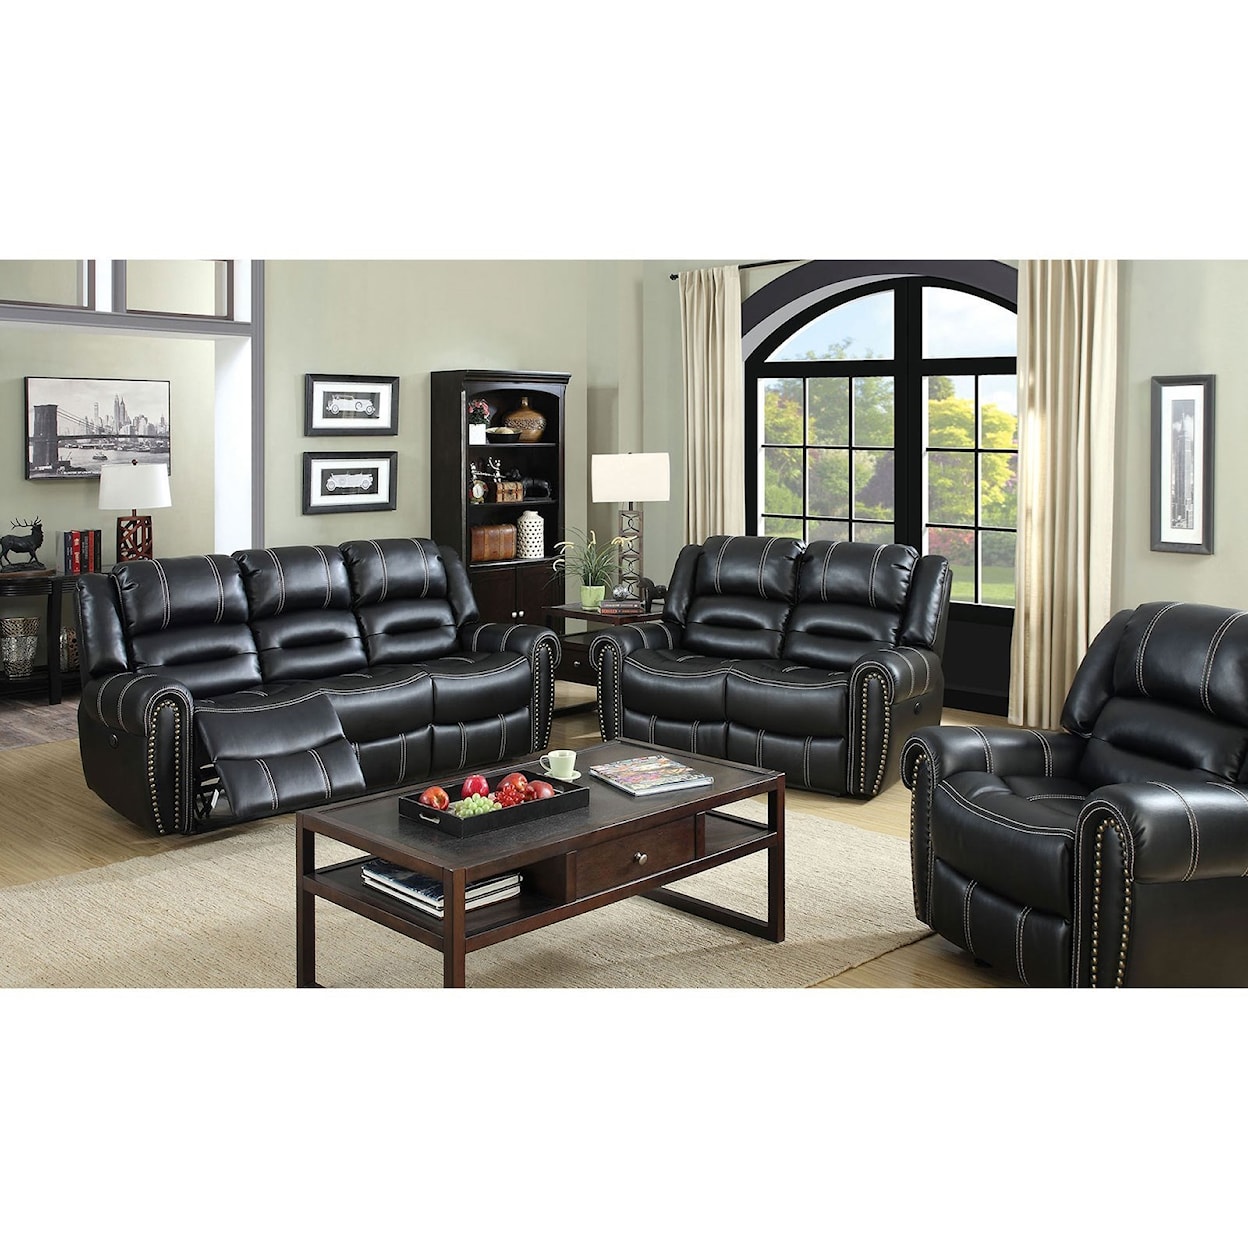 Furniture of America - FOA Frederick Reclining Living Room Group